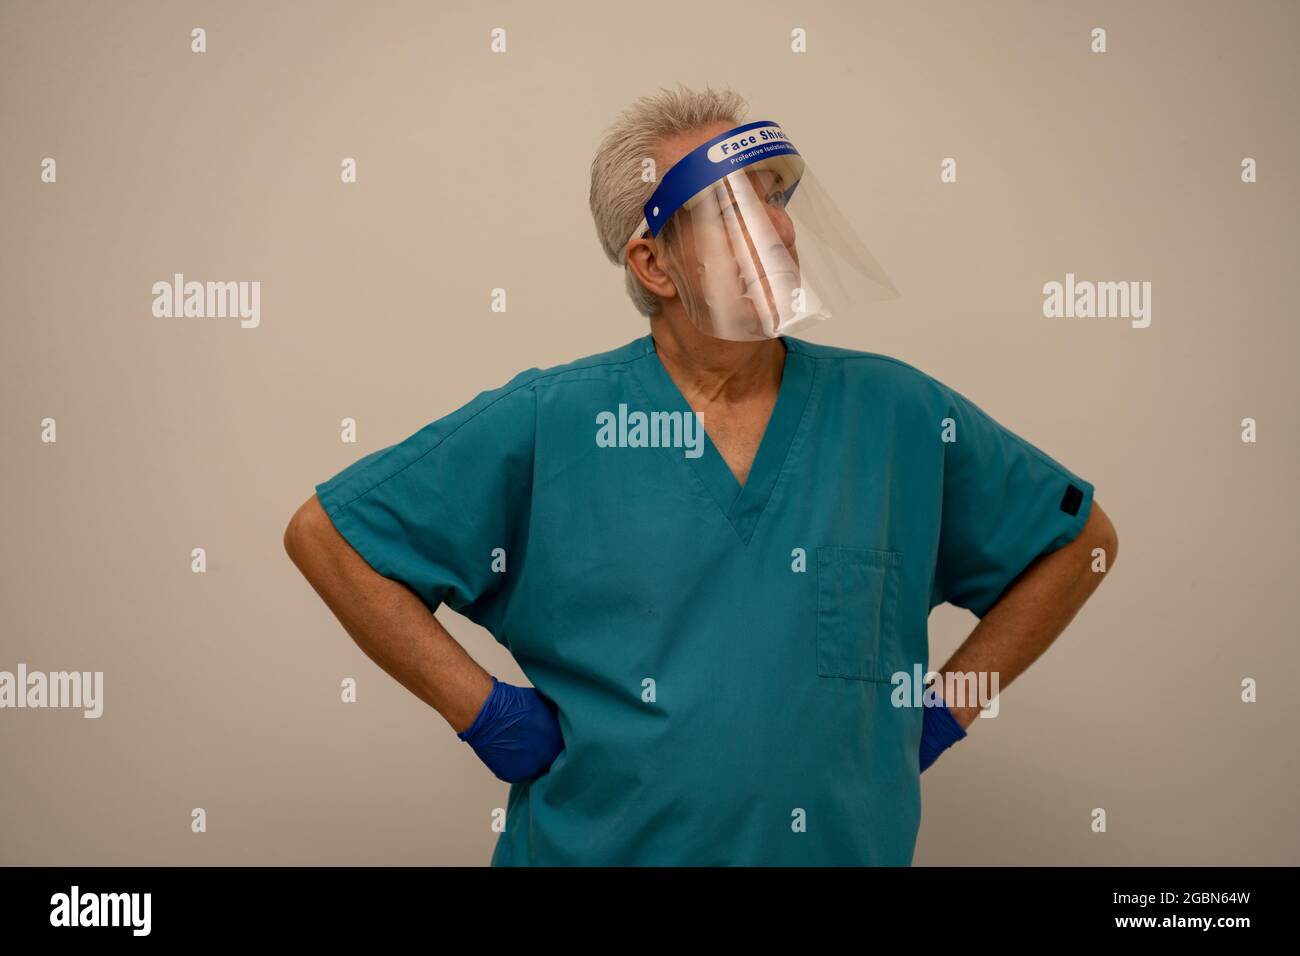 Male nurse with face mask shield and hands on hips akimbo Stock Photo